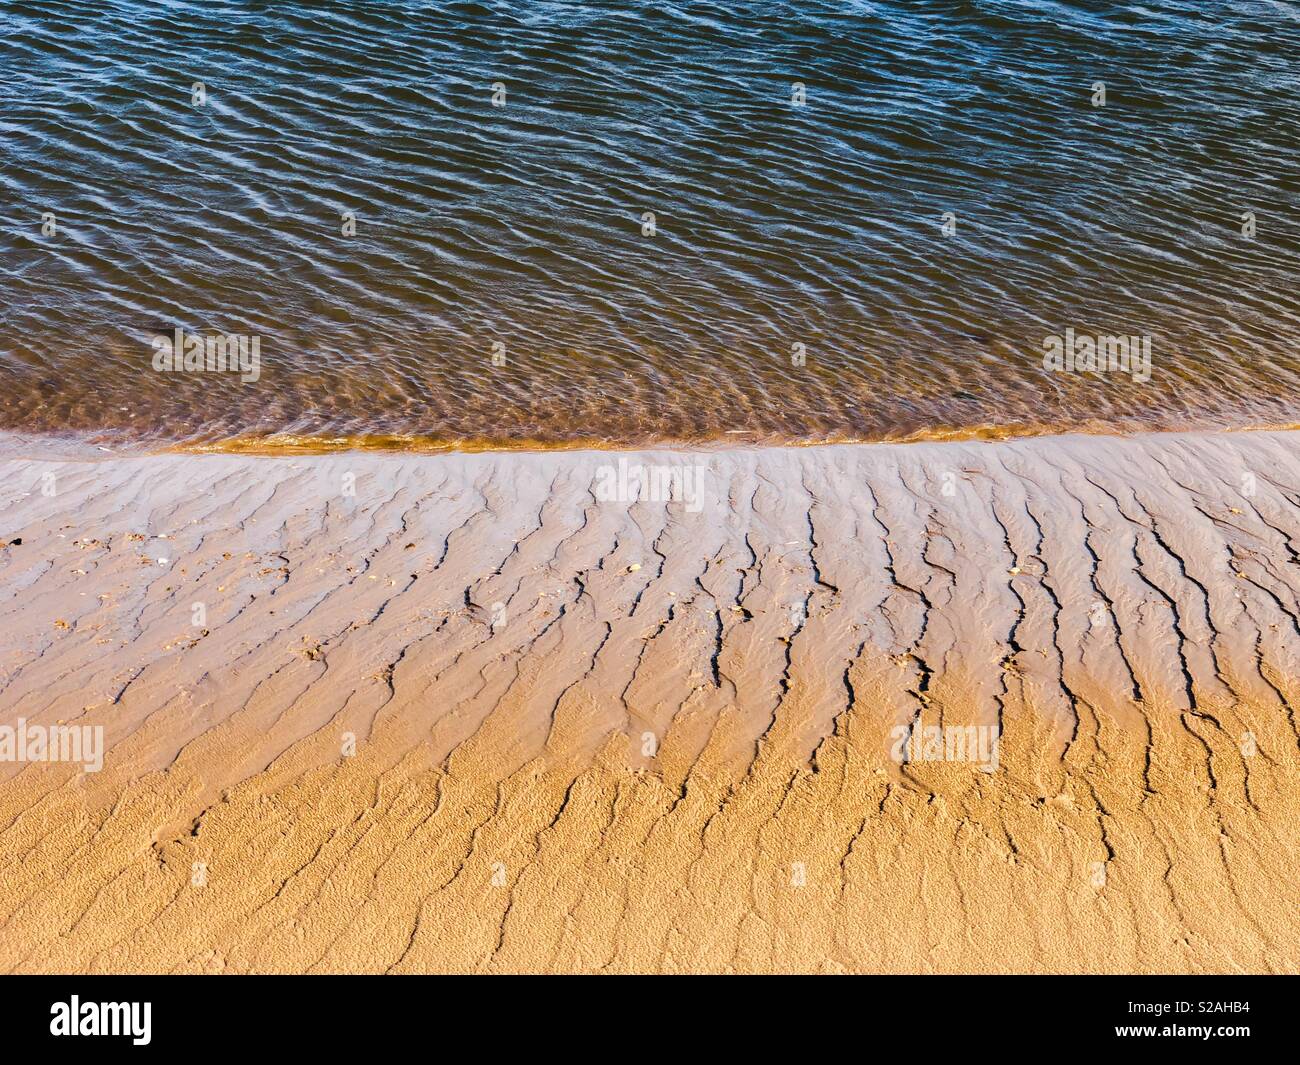 Waterline where the sea meets the sand leaving abstract patterns Stock Photo